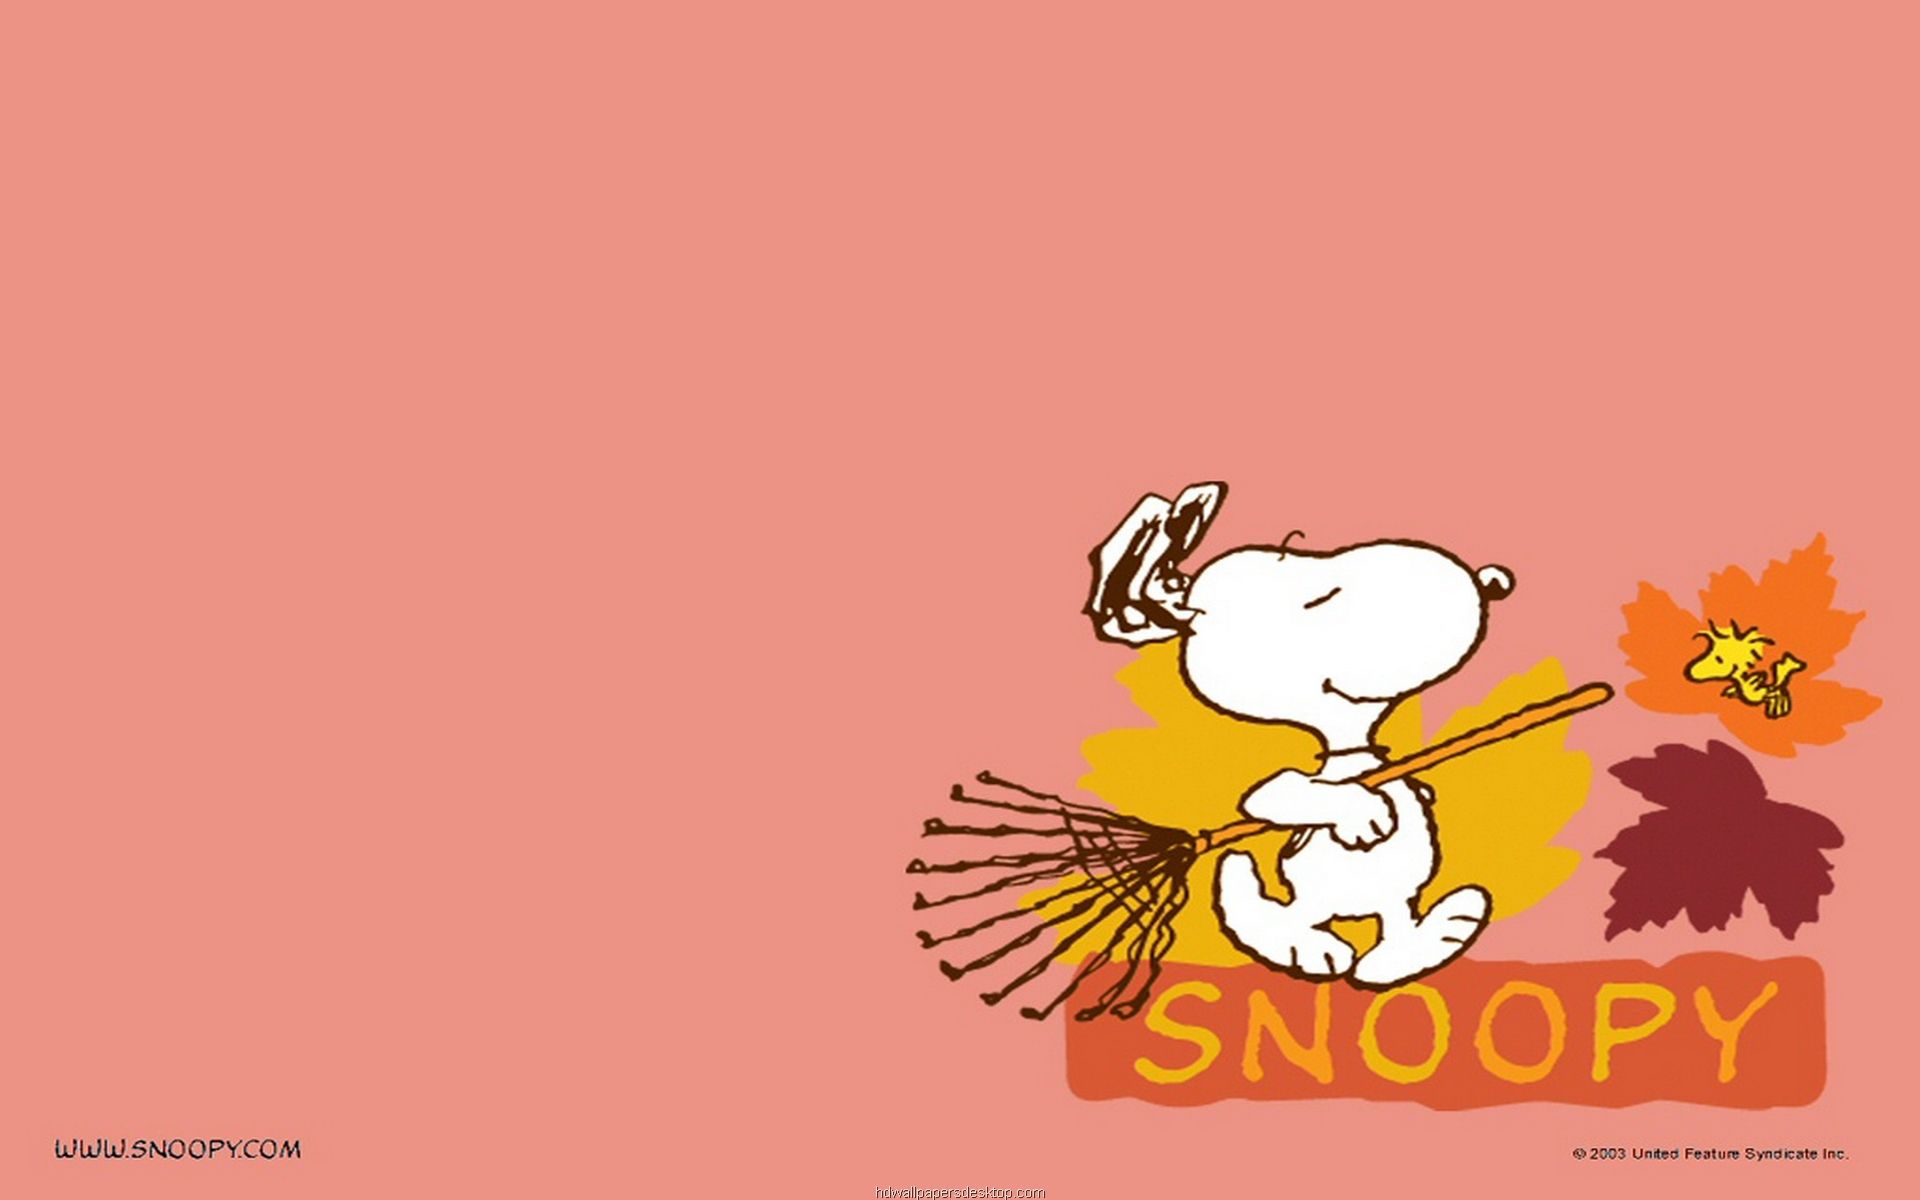 Snoopy Wallpaper Large HD Database